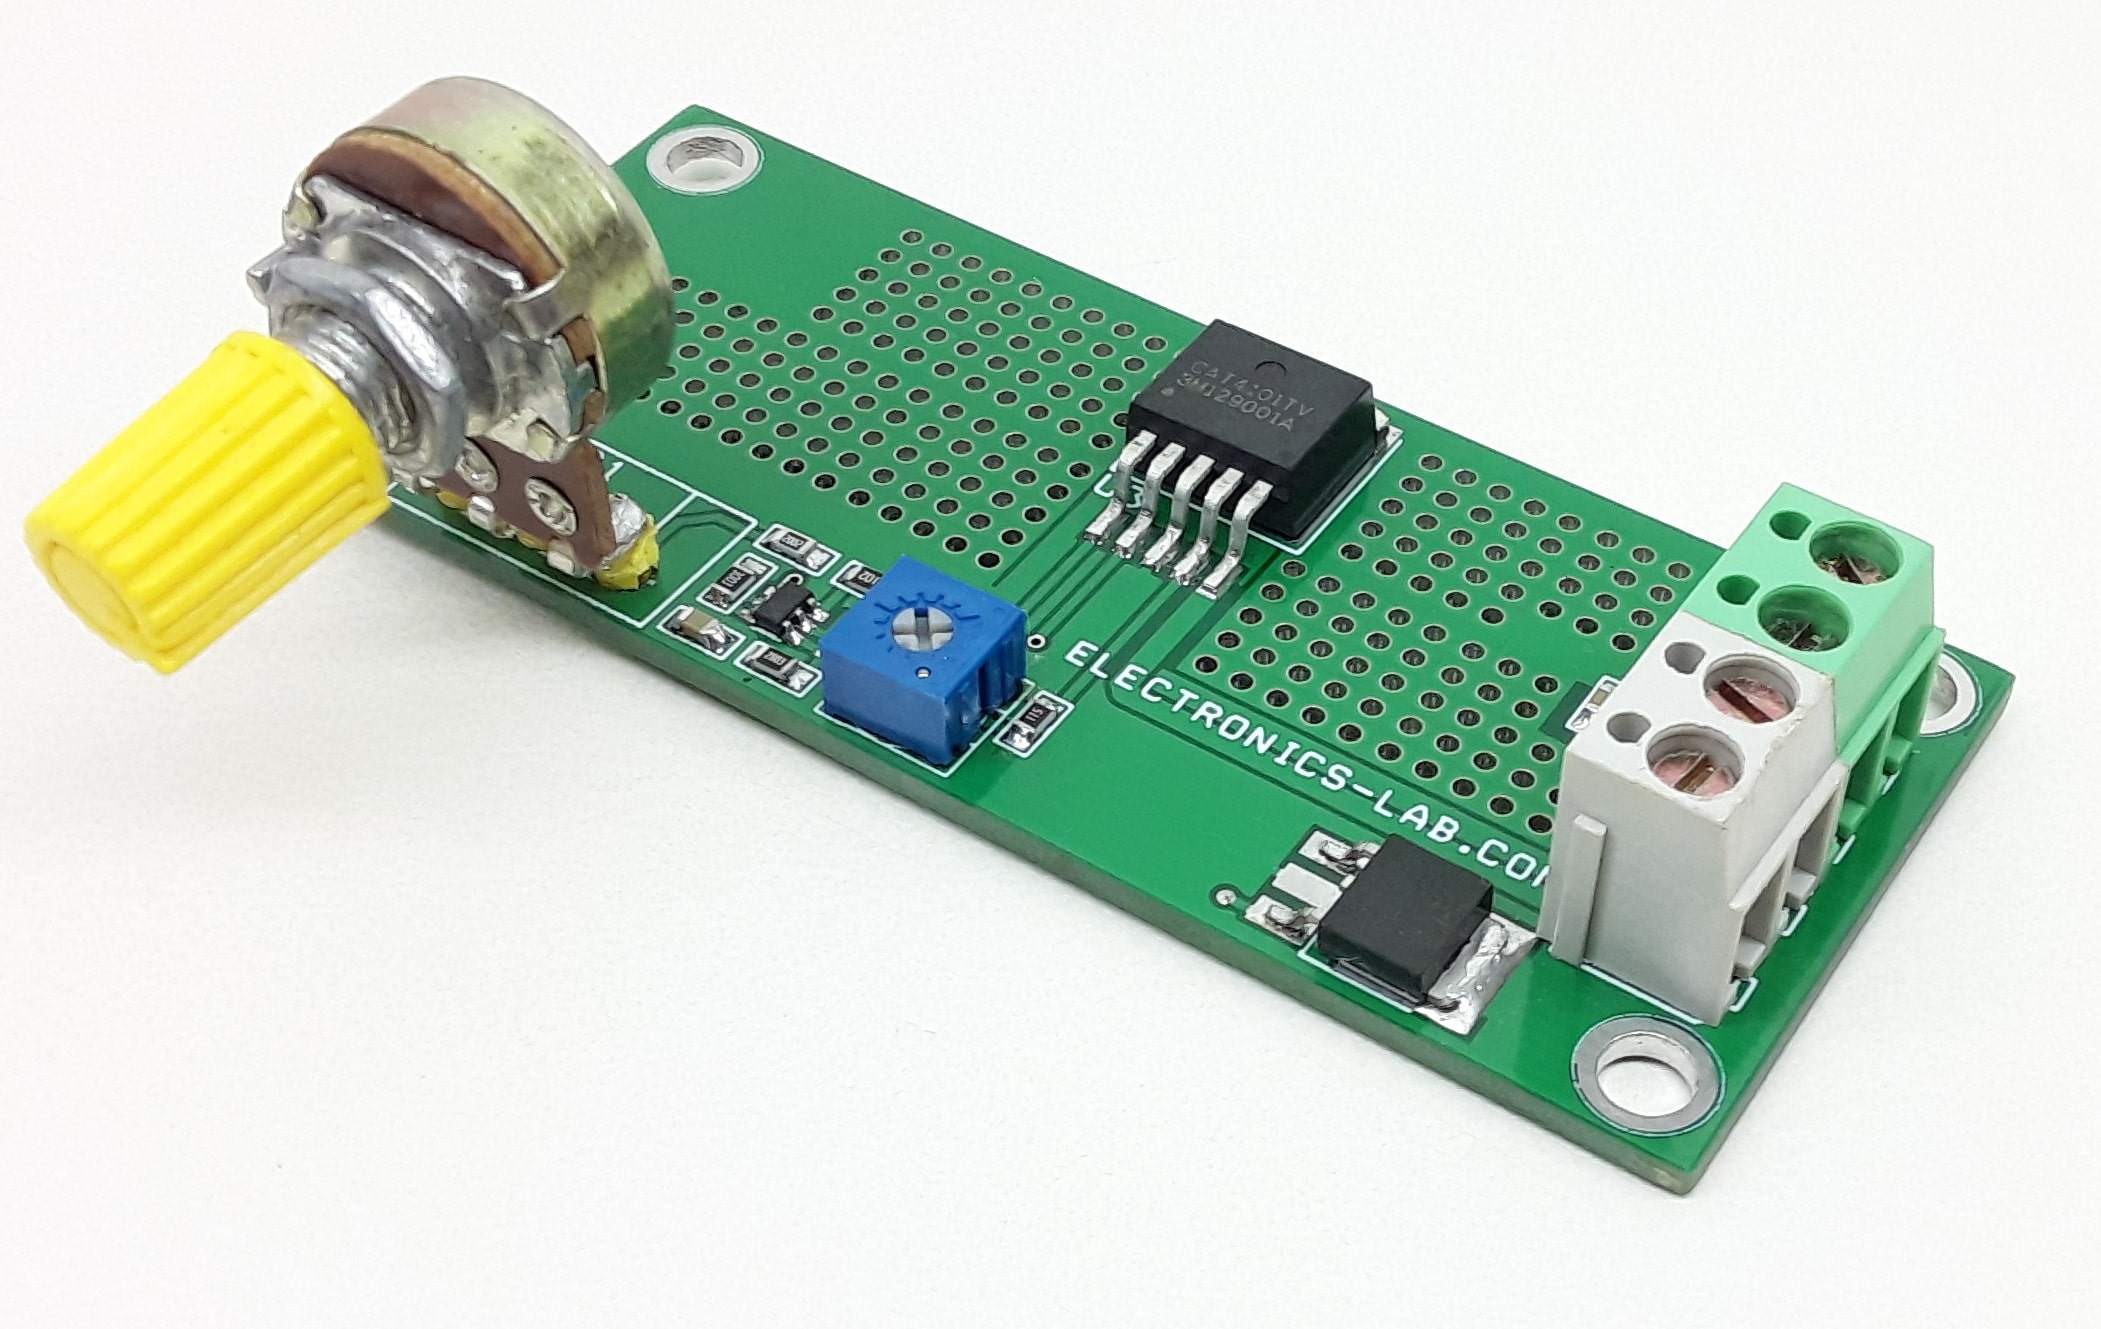 12W Constant-Current LED Driver with PWM Dimming - 12V DC@1A Input Electronics-Lab.com